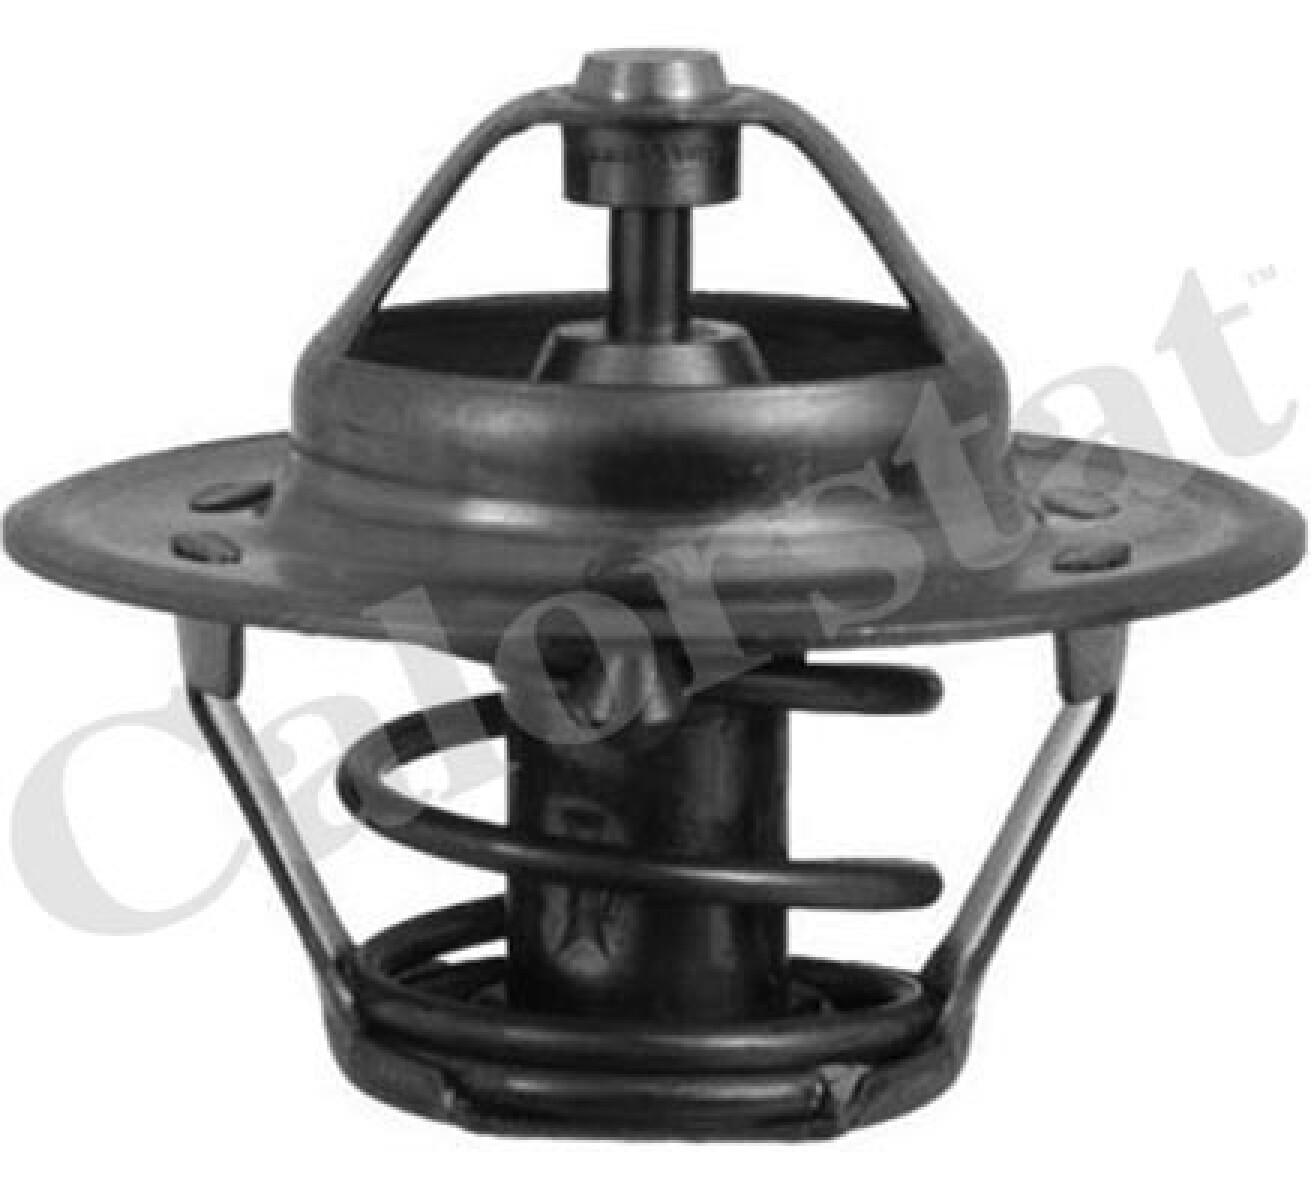 TERMOSTATO HYUNDAI NISSAN OPEL ROVER FORD 54MM SIMPLE MLH 